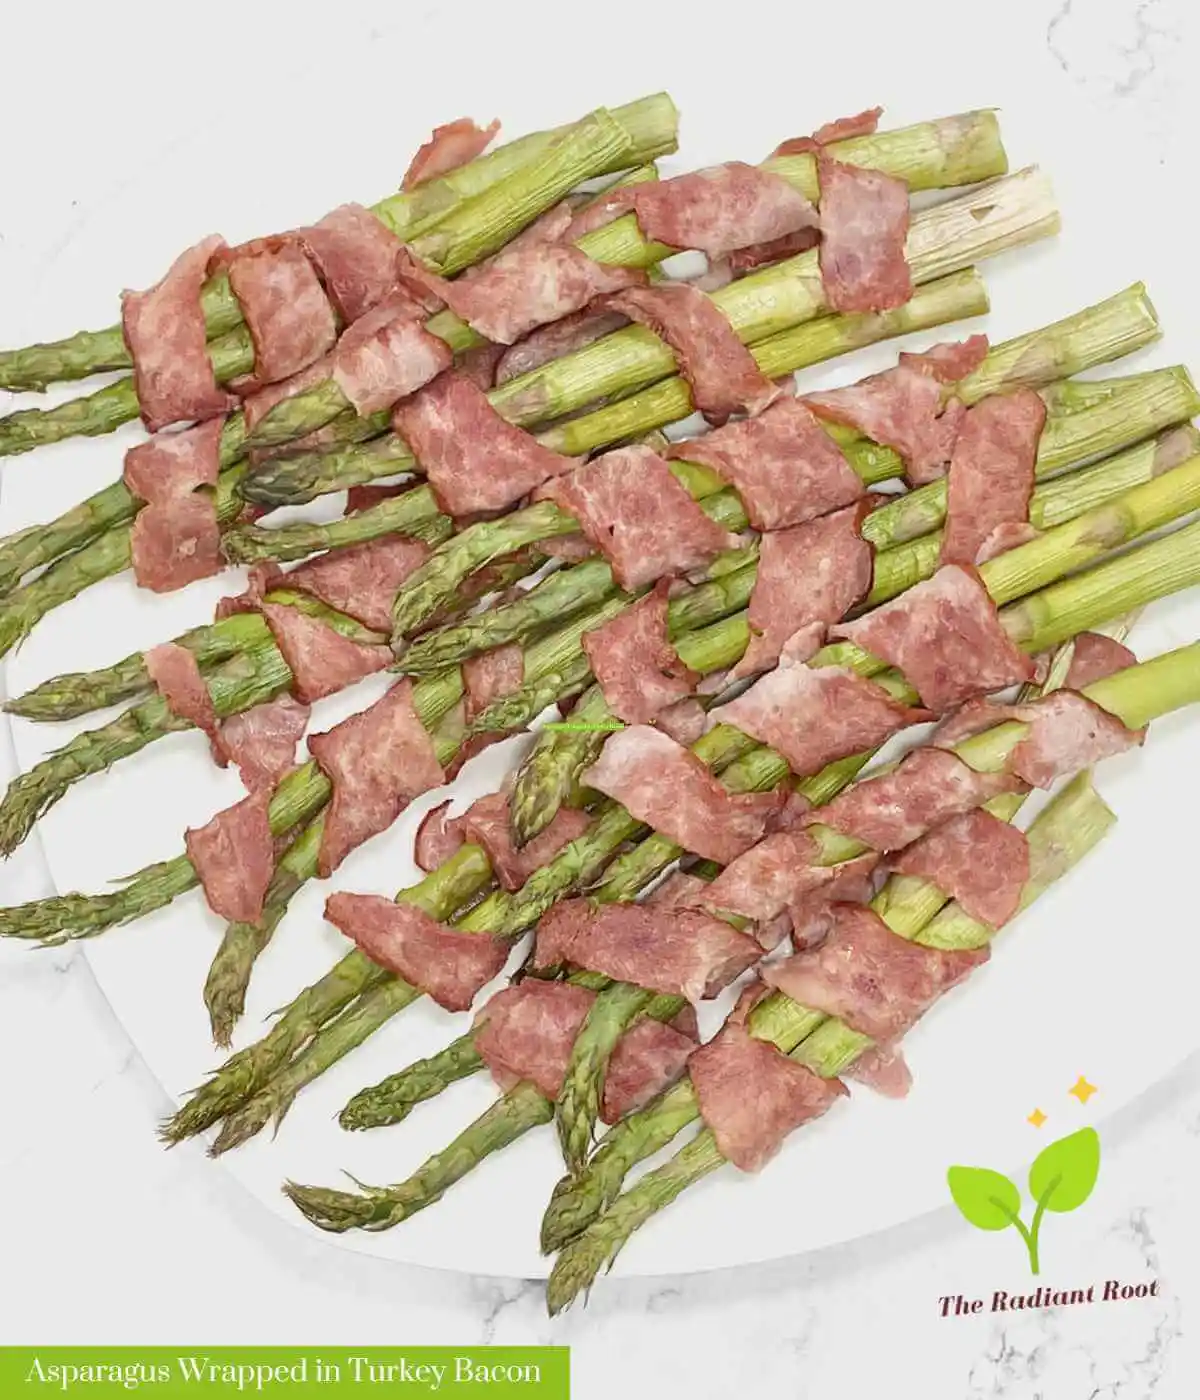 Roasted asparagus spears wrapped in turkey bacon | turkey bacon wrapped asparagus | The Radiant Root